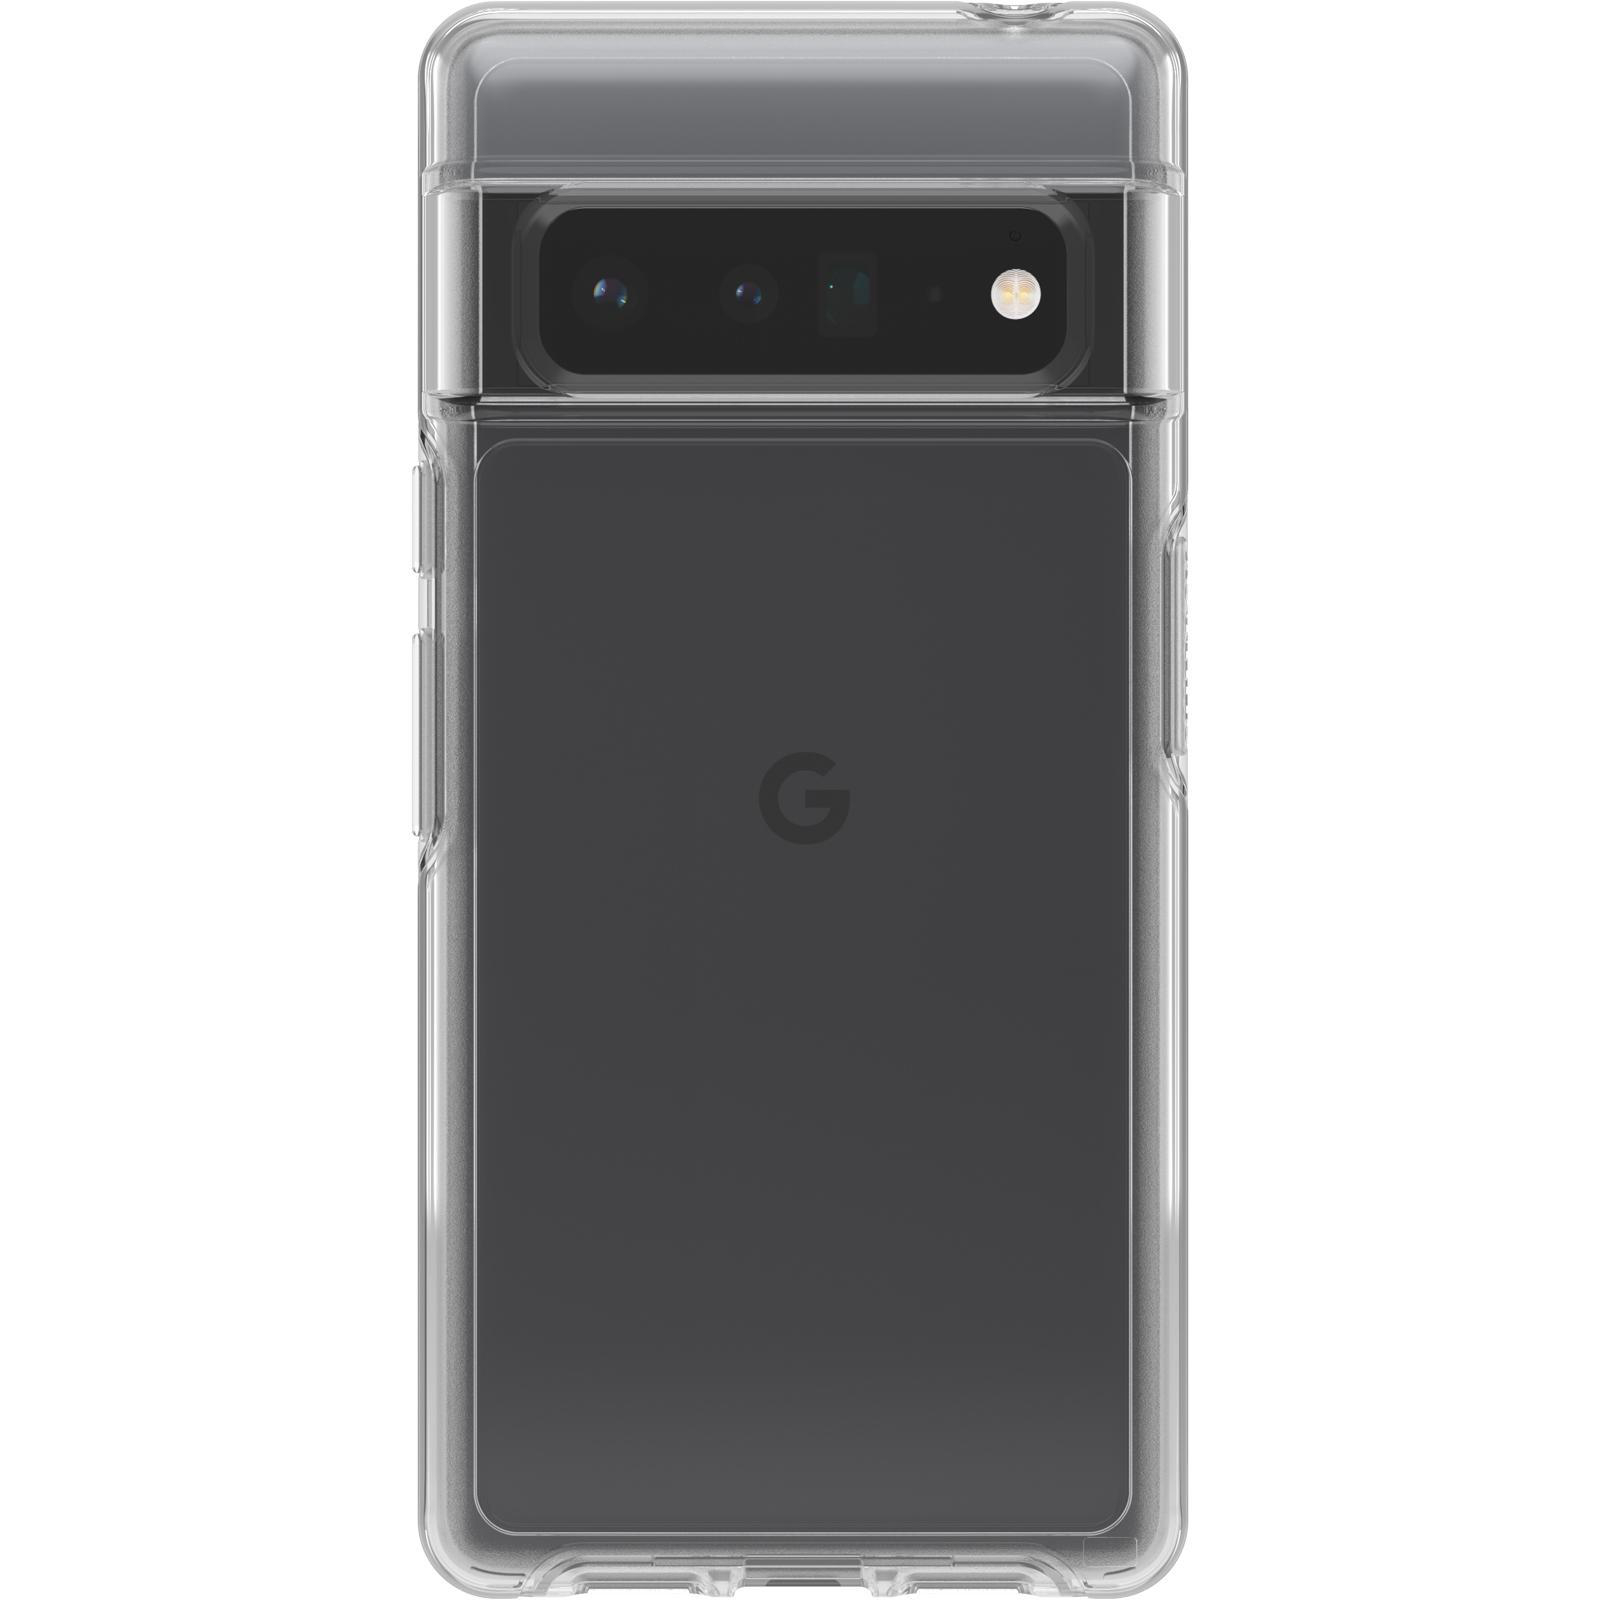 Backcover, Pixel 6 Symmetry Google, Clear Series, OTTERBOX Pro,